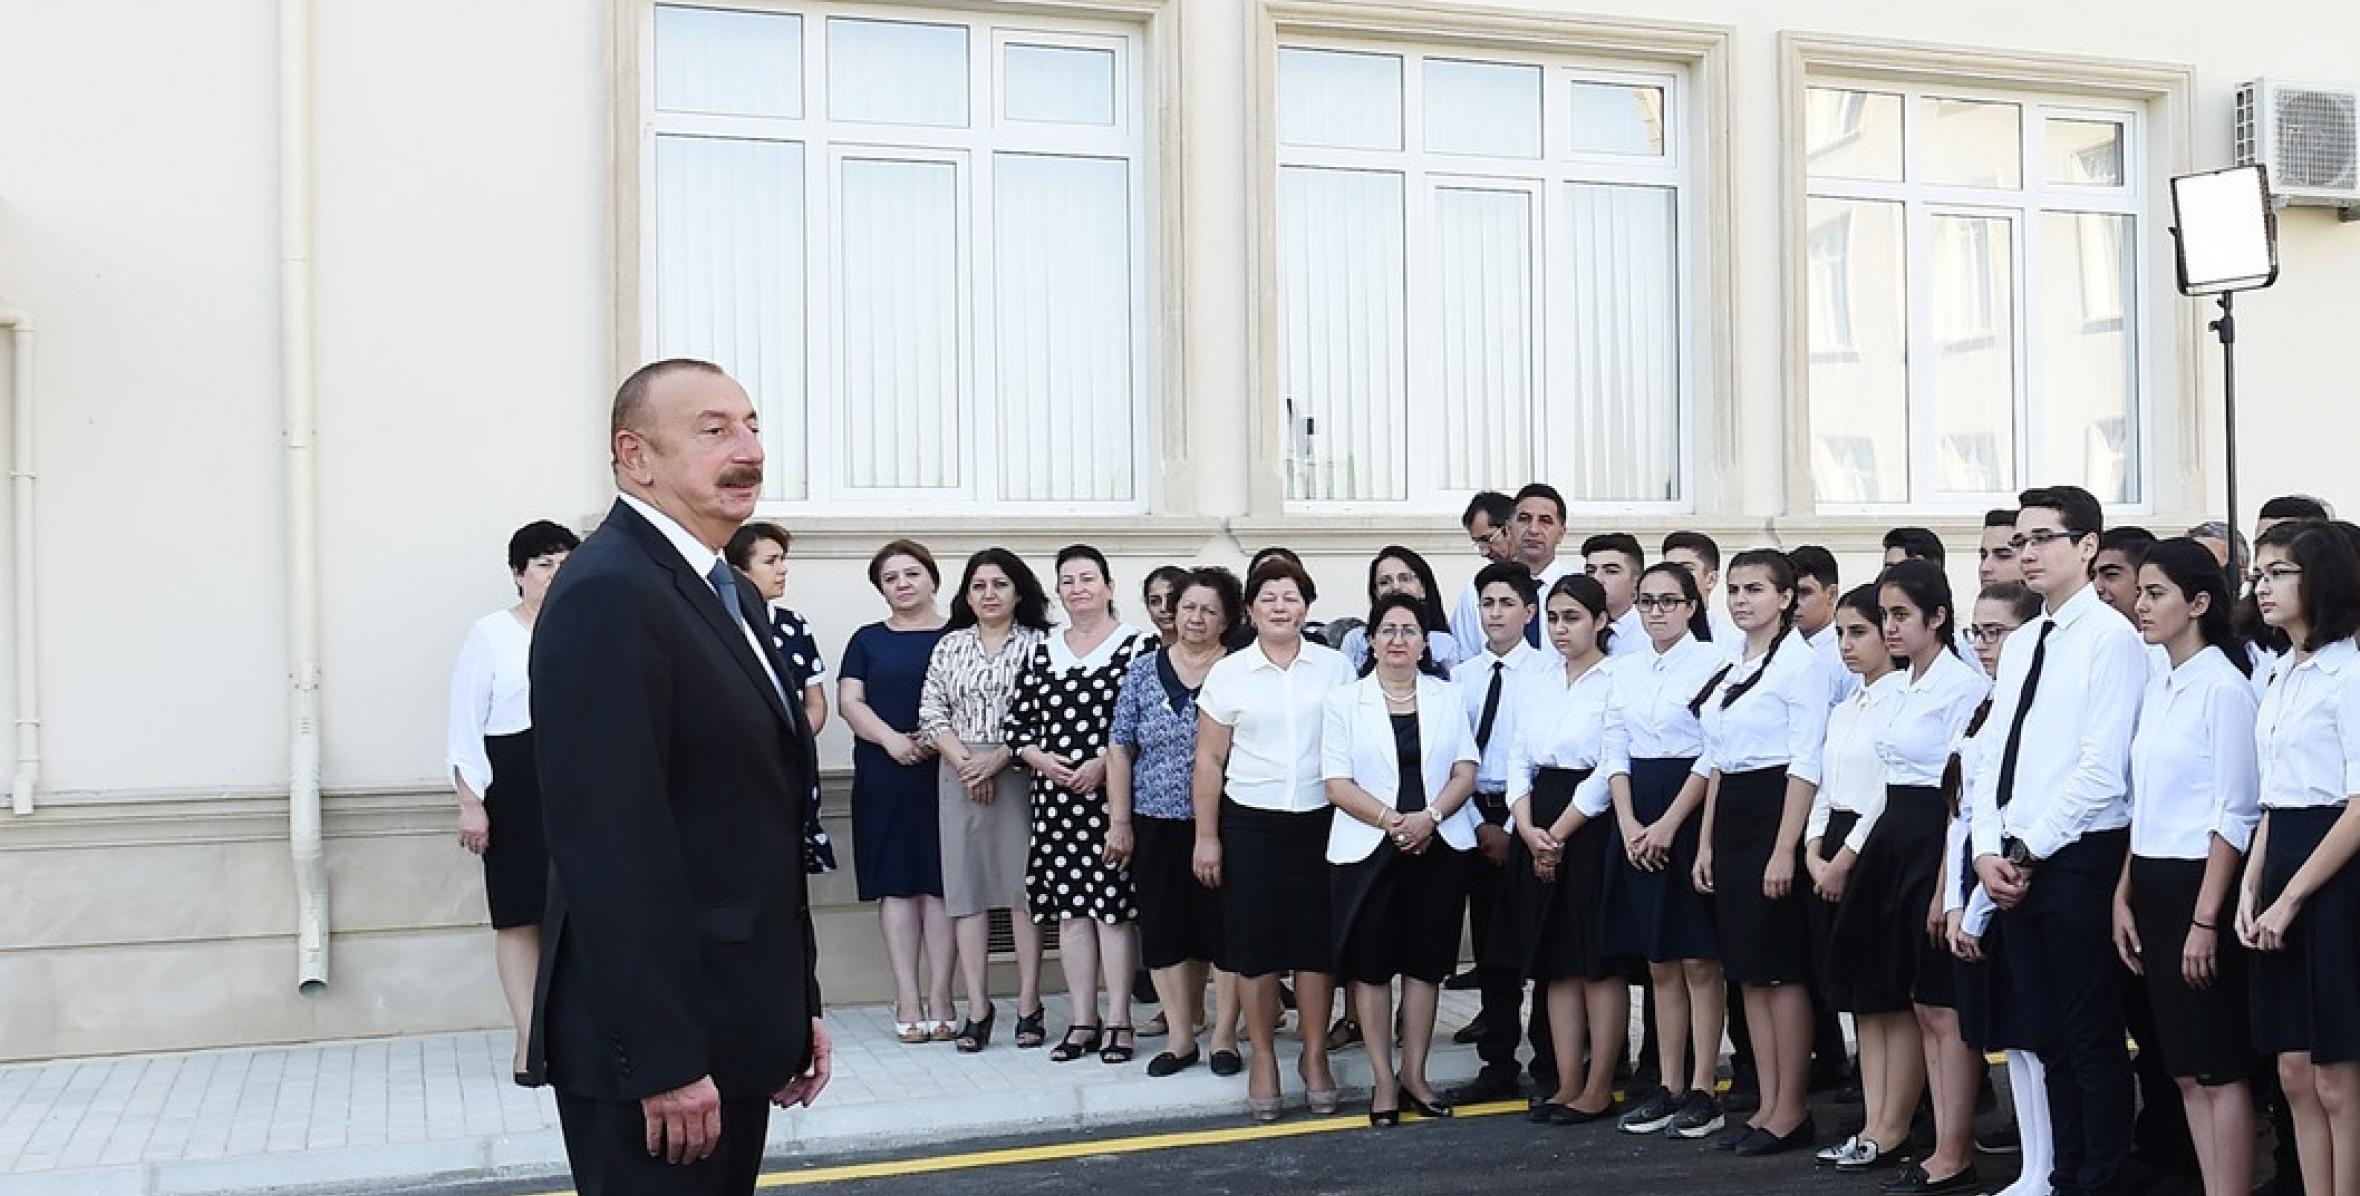 Speech by Ilham Aliyev at the secondary school No 28 in Mashtagha